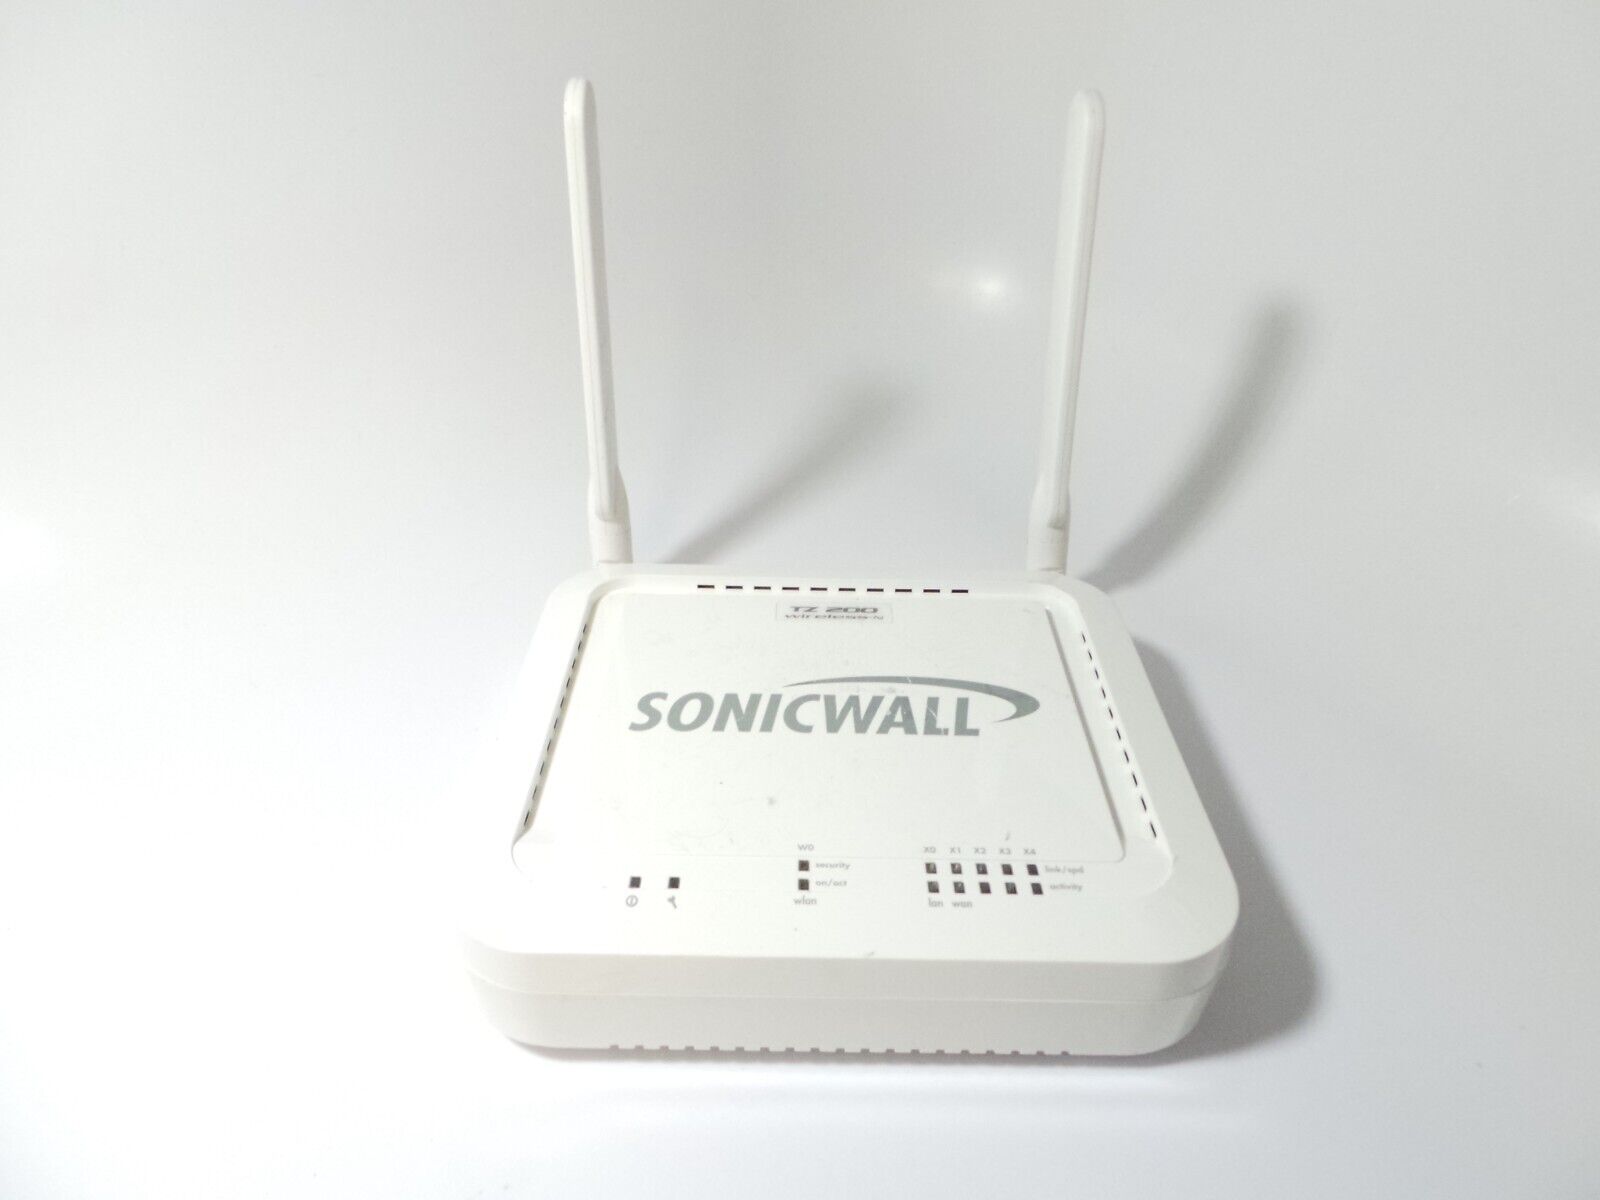 SonicWall TZ 200 APL22-070 Network Firewall Router - NO POWER SUPPLY -